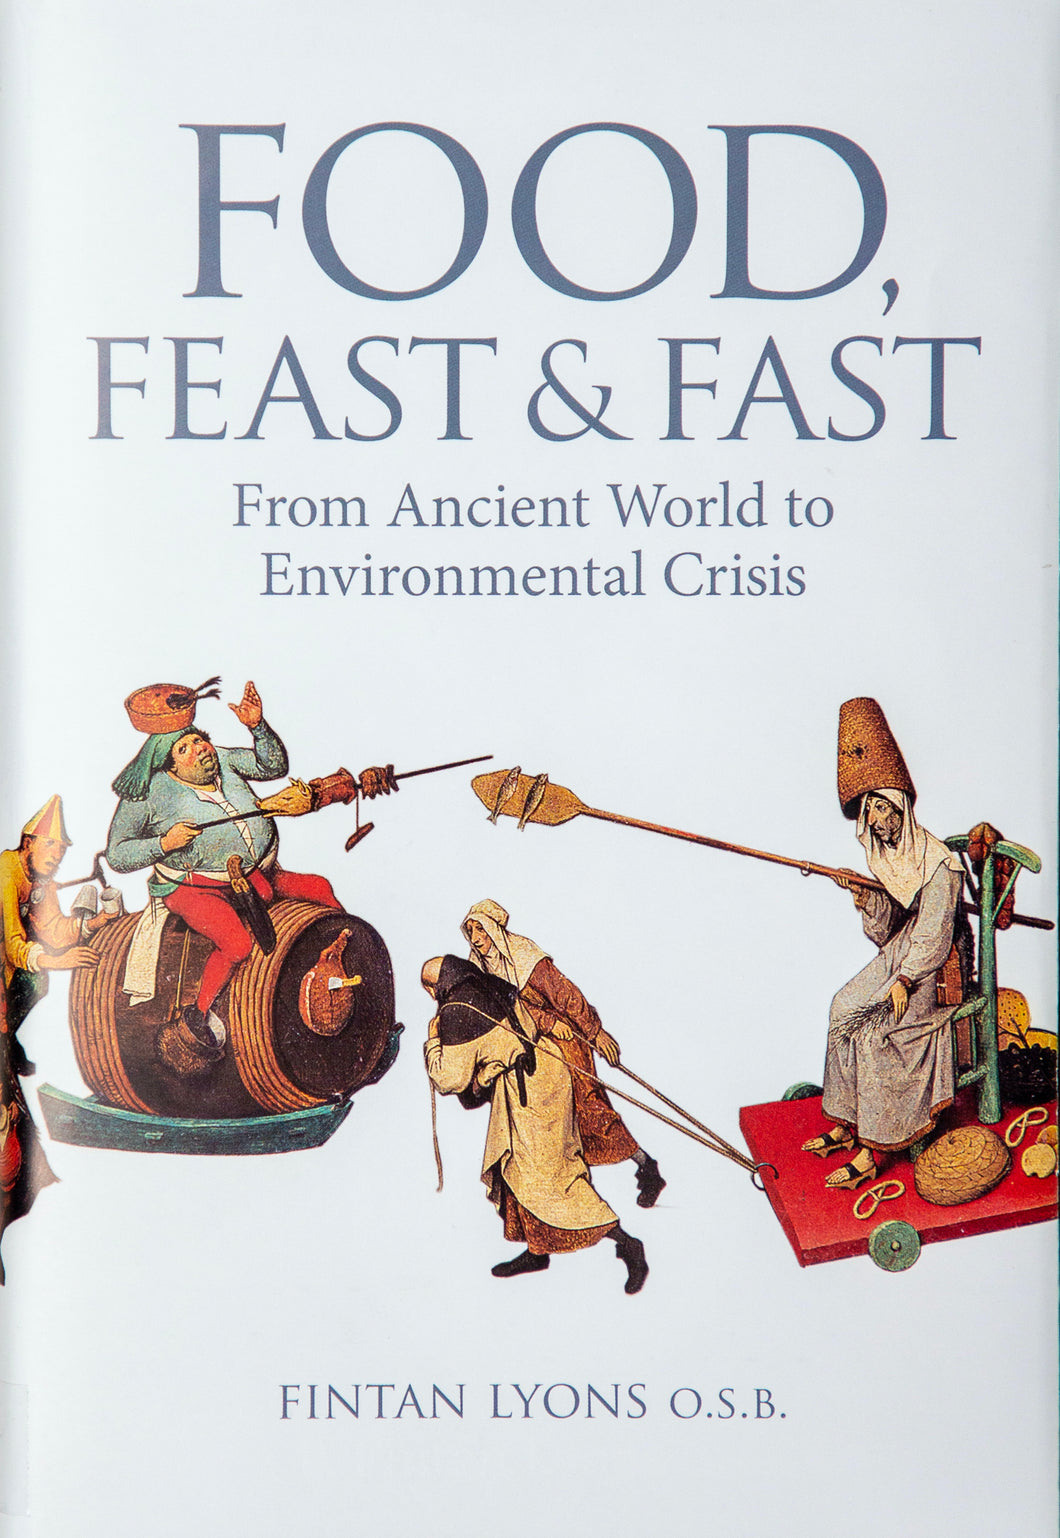 Food, Feast & Fast - From Ancient World to Environmental Crisis